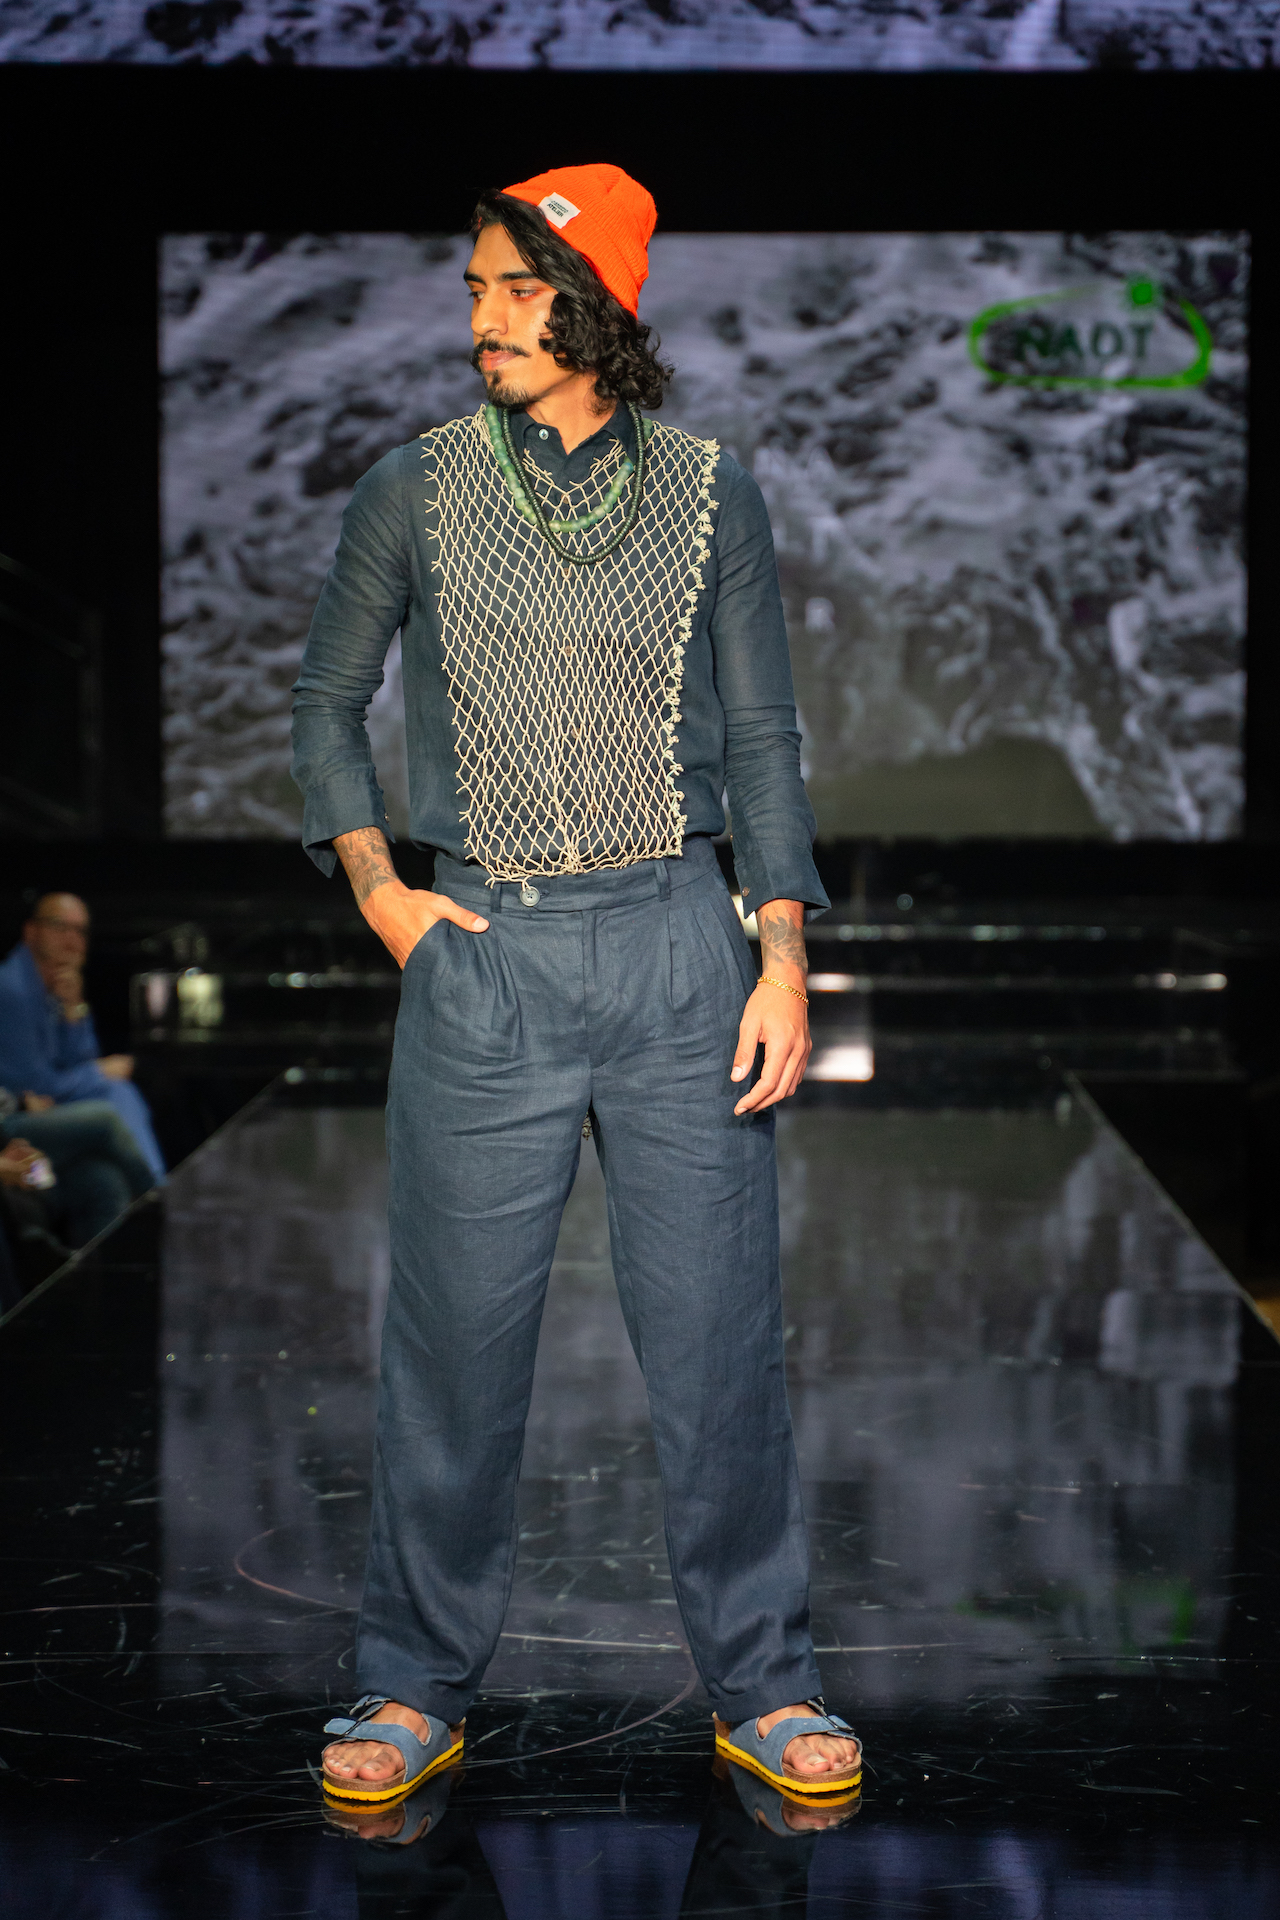 A menswear model stands on the runway in a navy shirt with a net overlay and navy pants designed by Marina Leight